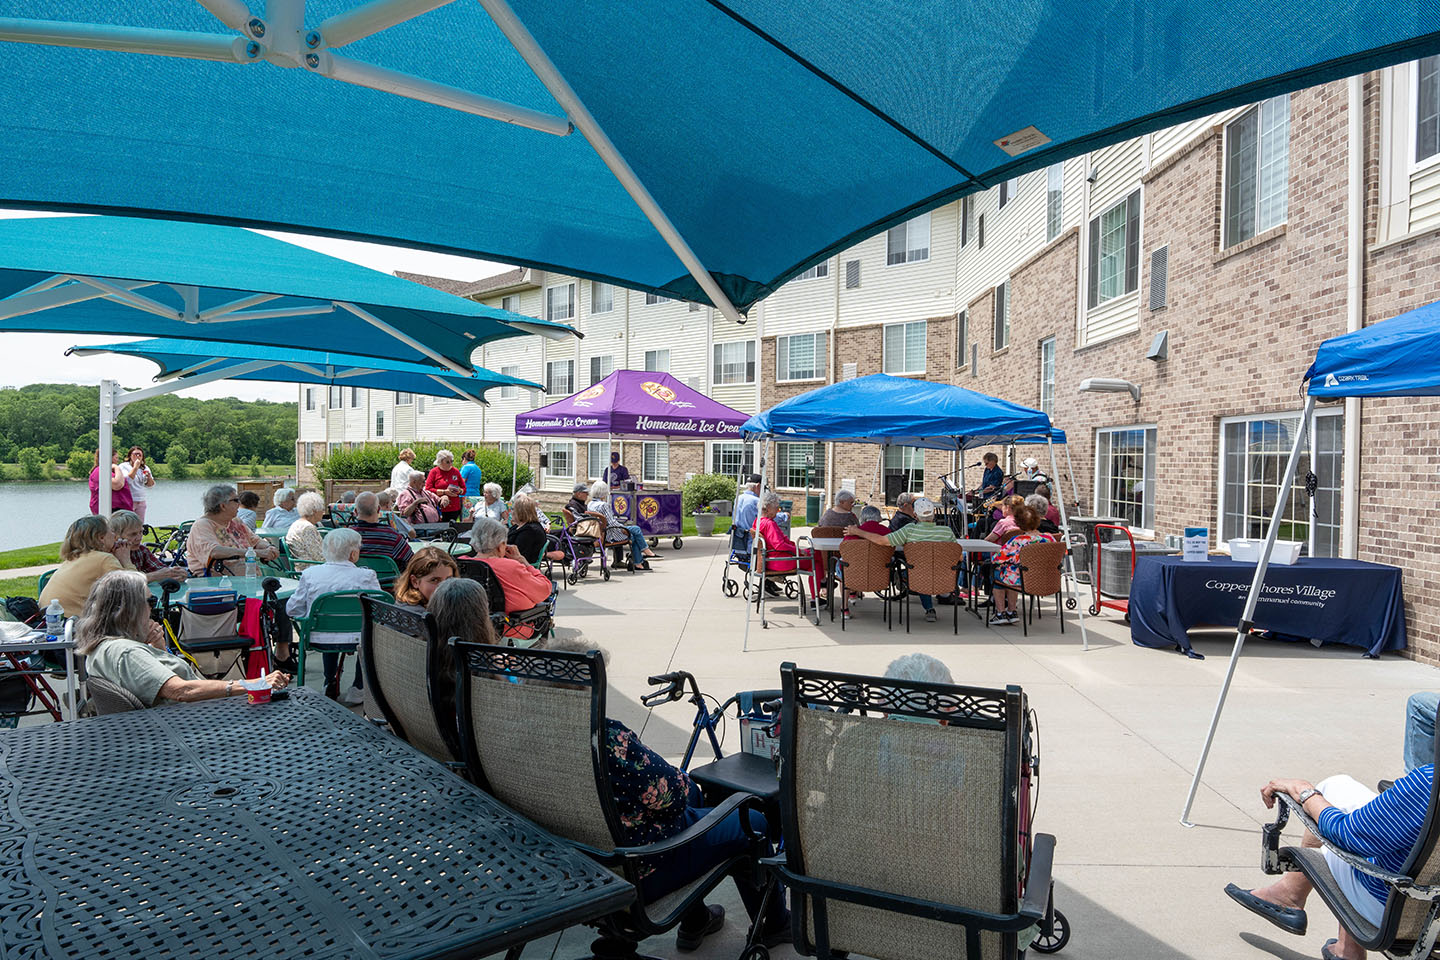 A group of seniors enjoy ice cream and live music on the patio.